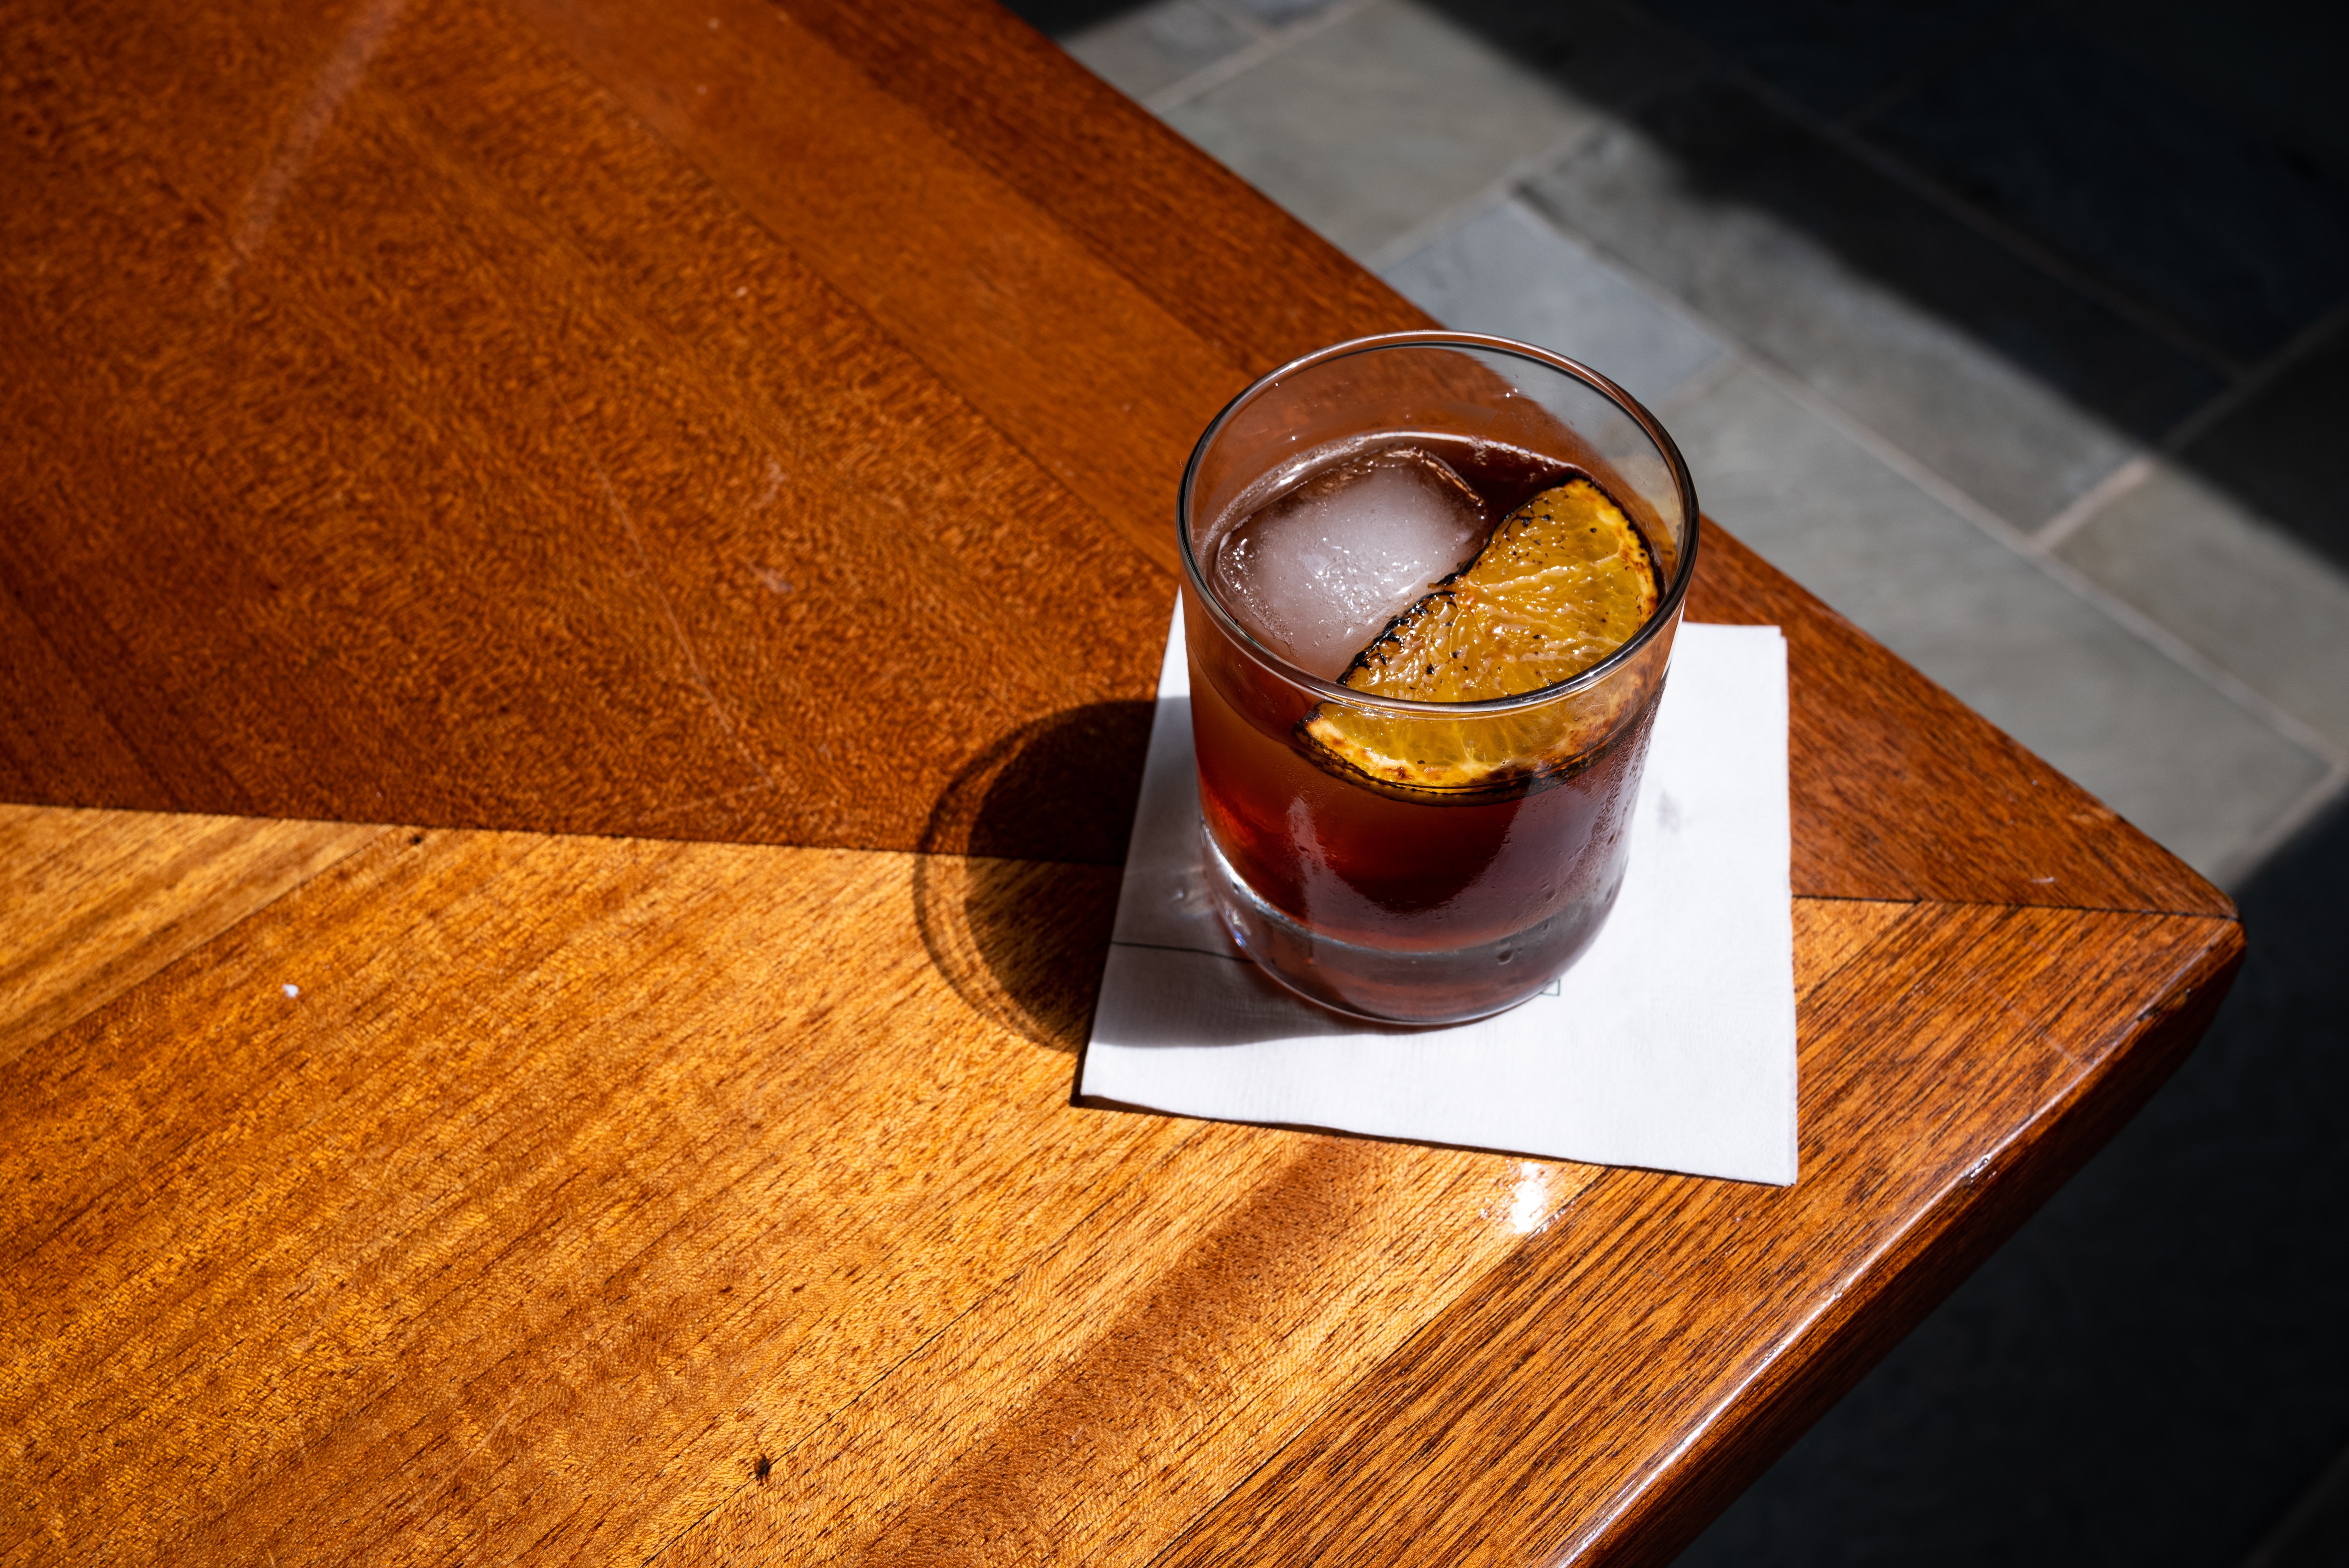 A drink on the edge of a wooden table